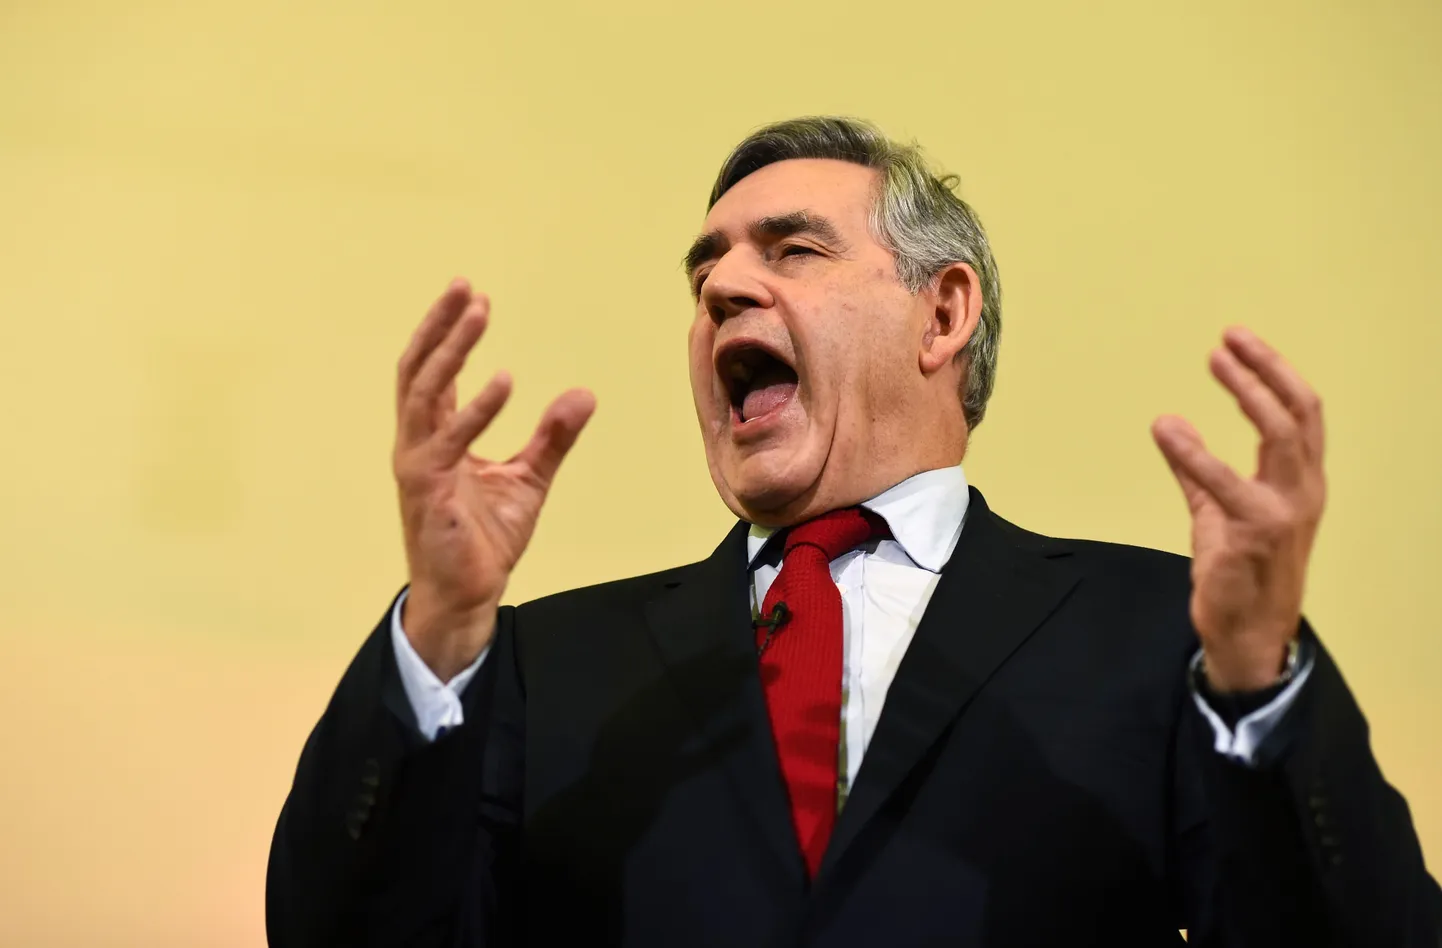 Britain's former Prime Minister Gordon Brown speaks at a campaign event in favour of the union in Clydebank, Scotland, in this September 16, 2014 file photo.   To match Special Report SCOTLAND-INDEPENDENCE/JOURNEY    REUTERS/Dylan Martinez/Files  (BRITAIN - Tags: POLITICS)